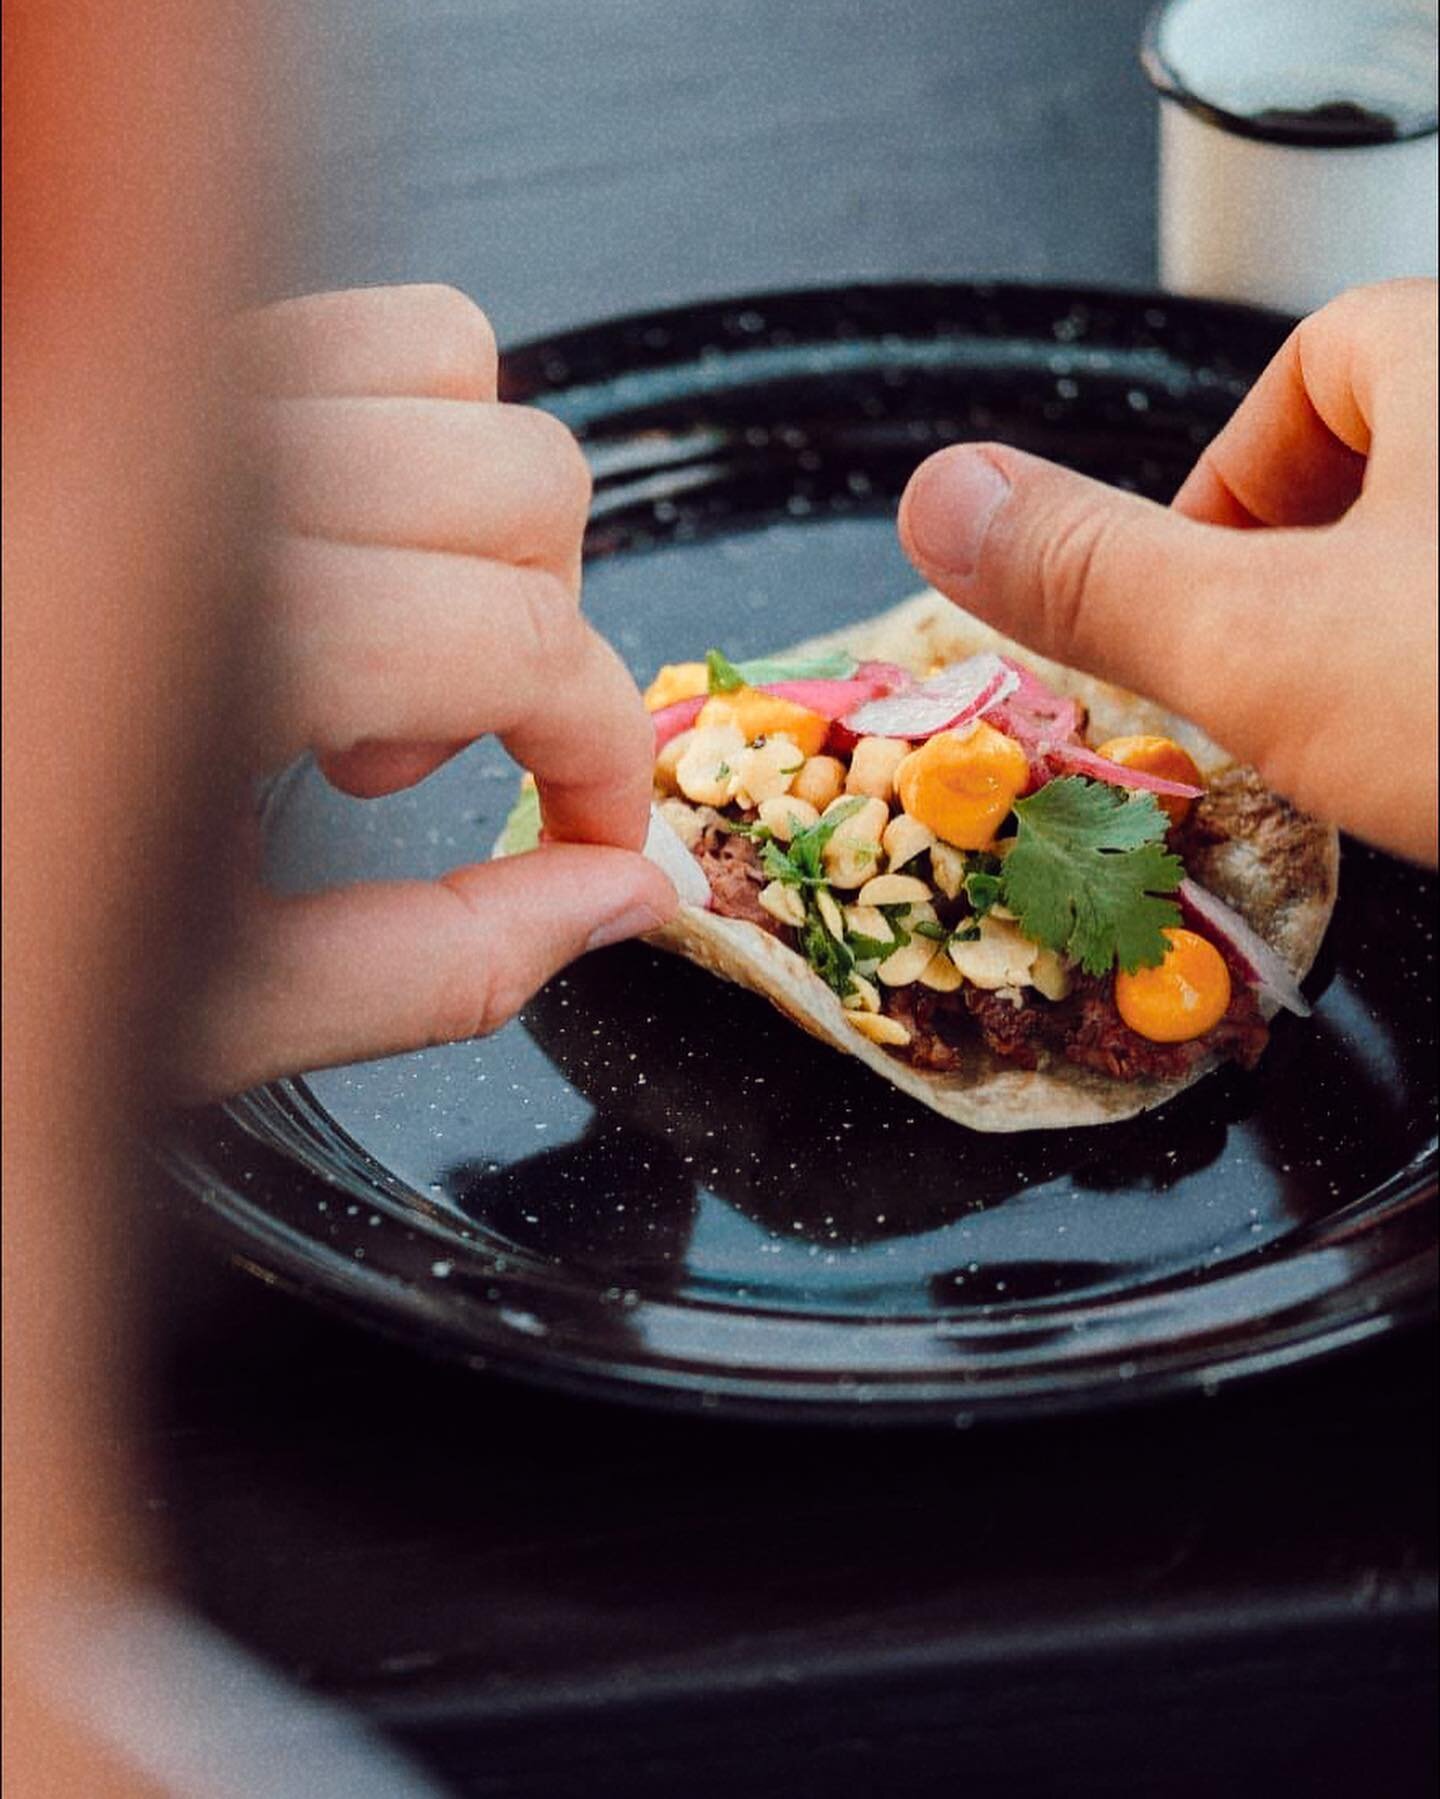 Experience innovative Mexican flavors at @tacoteca.ts in Todos Santos. Visit us at Plaza Amigos. Stop by today!.
.
.
.
.
#tacos #mexicanfood #foodie #plazaamigosts #plazaamigos #todossantos #pescadero #todossantosbcs